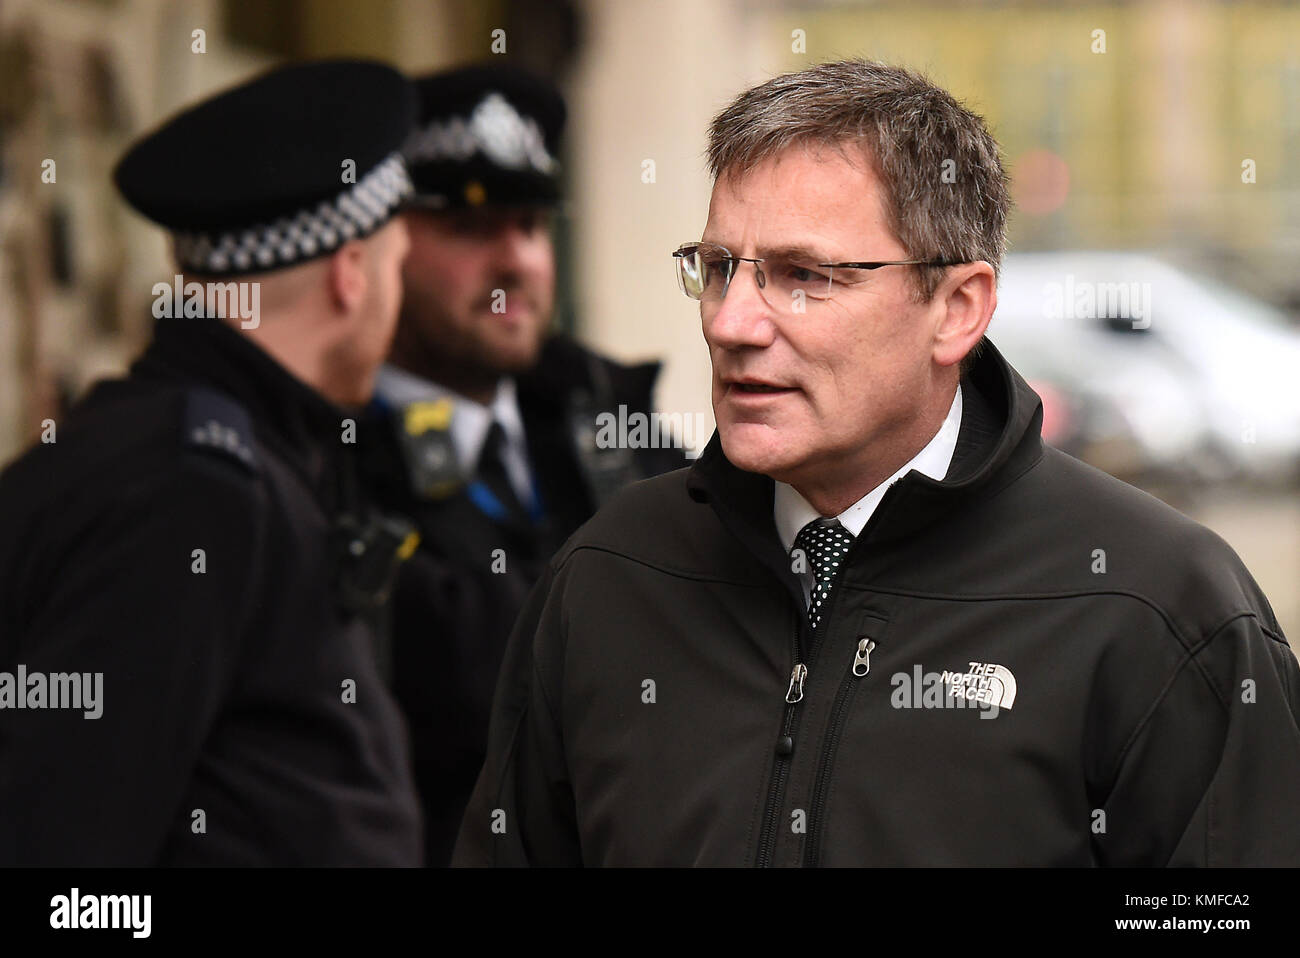 Assistant Chief Constable Marcus Beale, who is accused of failing to safeguard documents under the Official Secrets Act, arrives at Westminster Magistrates' Court in London. Stock Photo